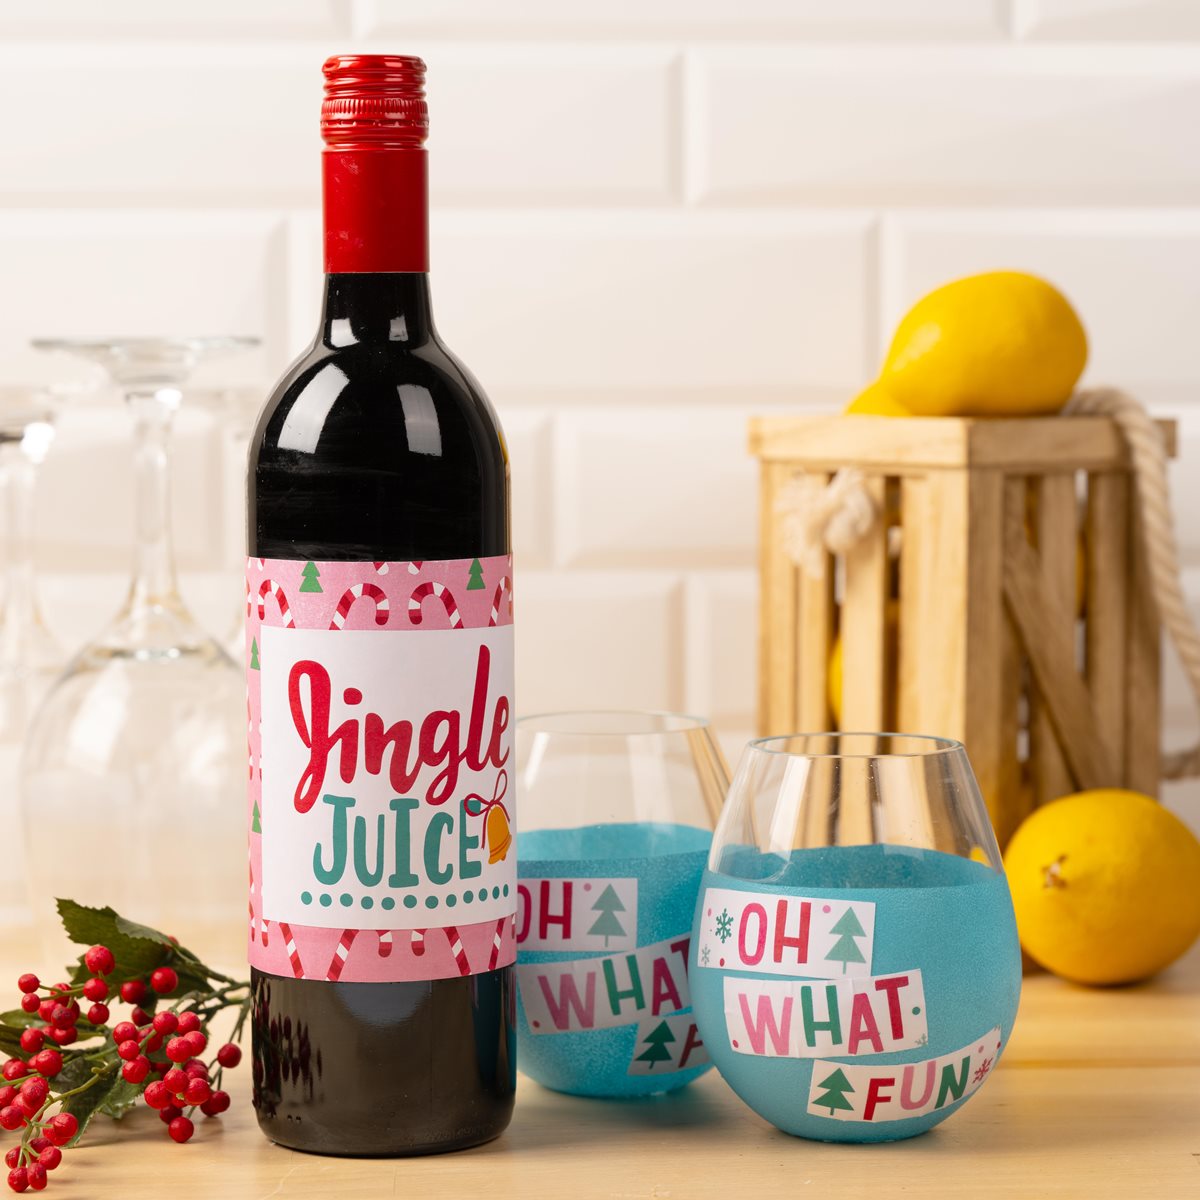 https://plaidonline.com/getattachment/Projects/Christmas-Wine-and-2-Stemless-Glasses/PL_GiftGuide_bty_JingleJuice_092923_TIF.Jpg;